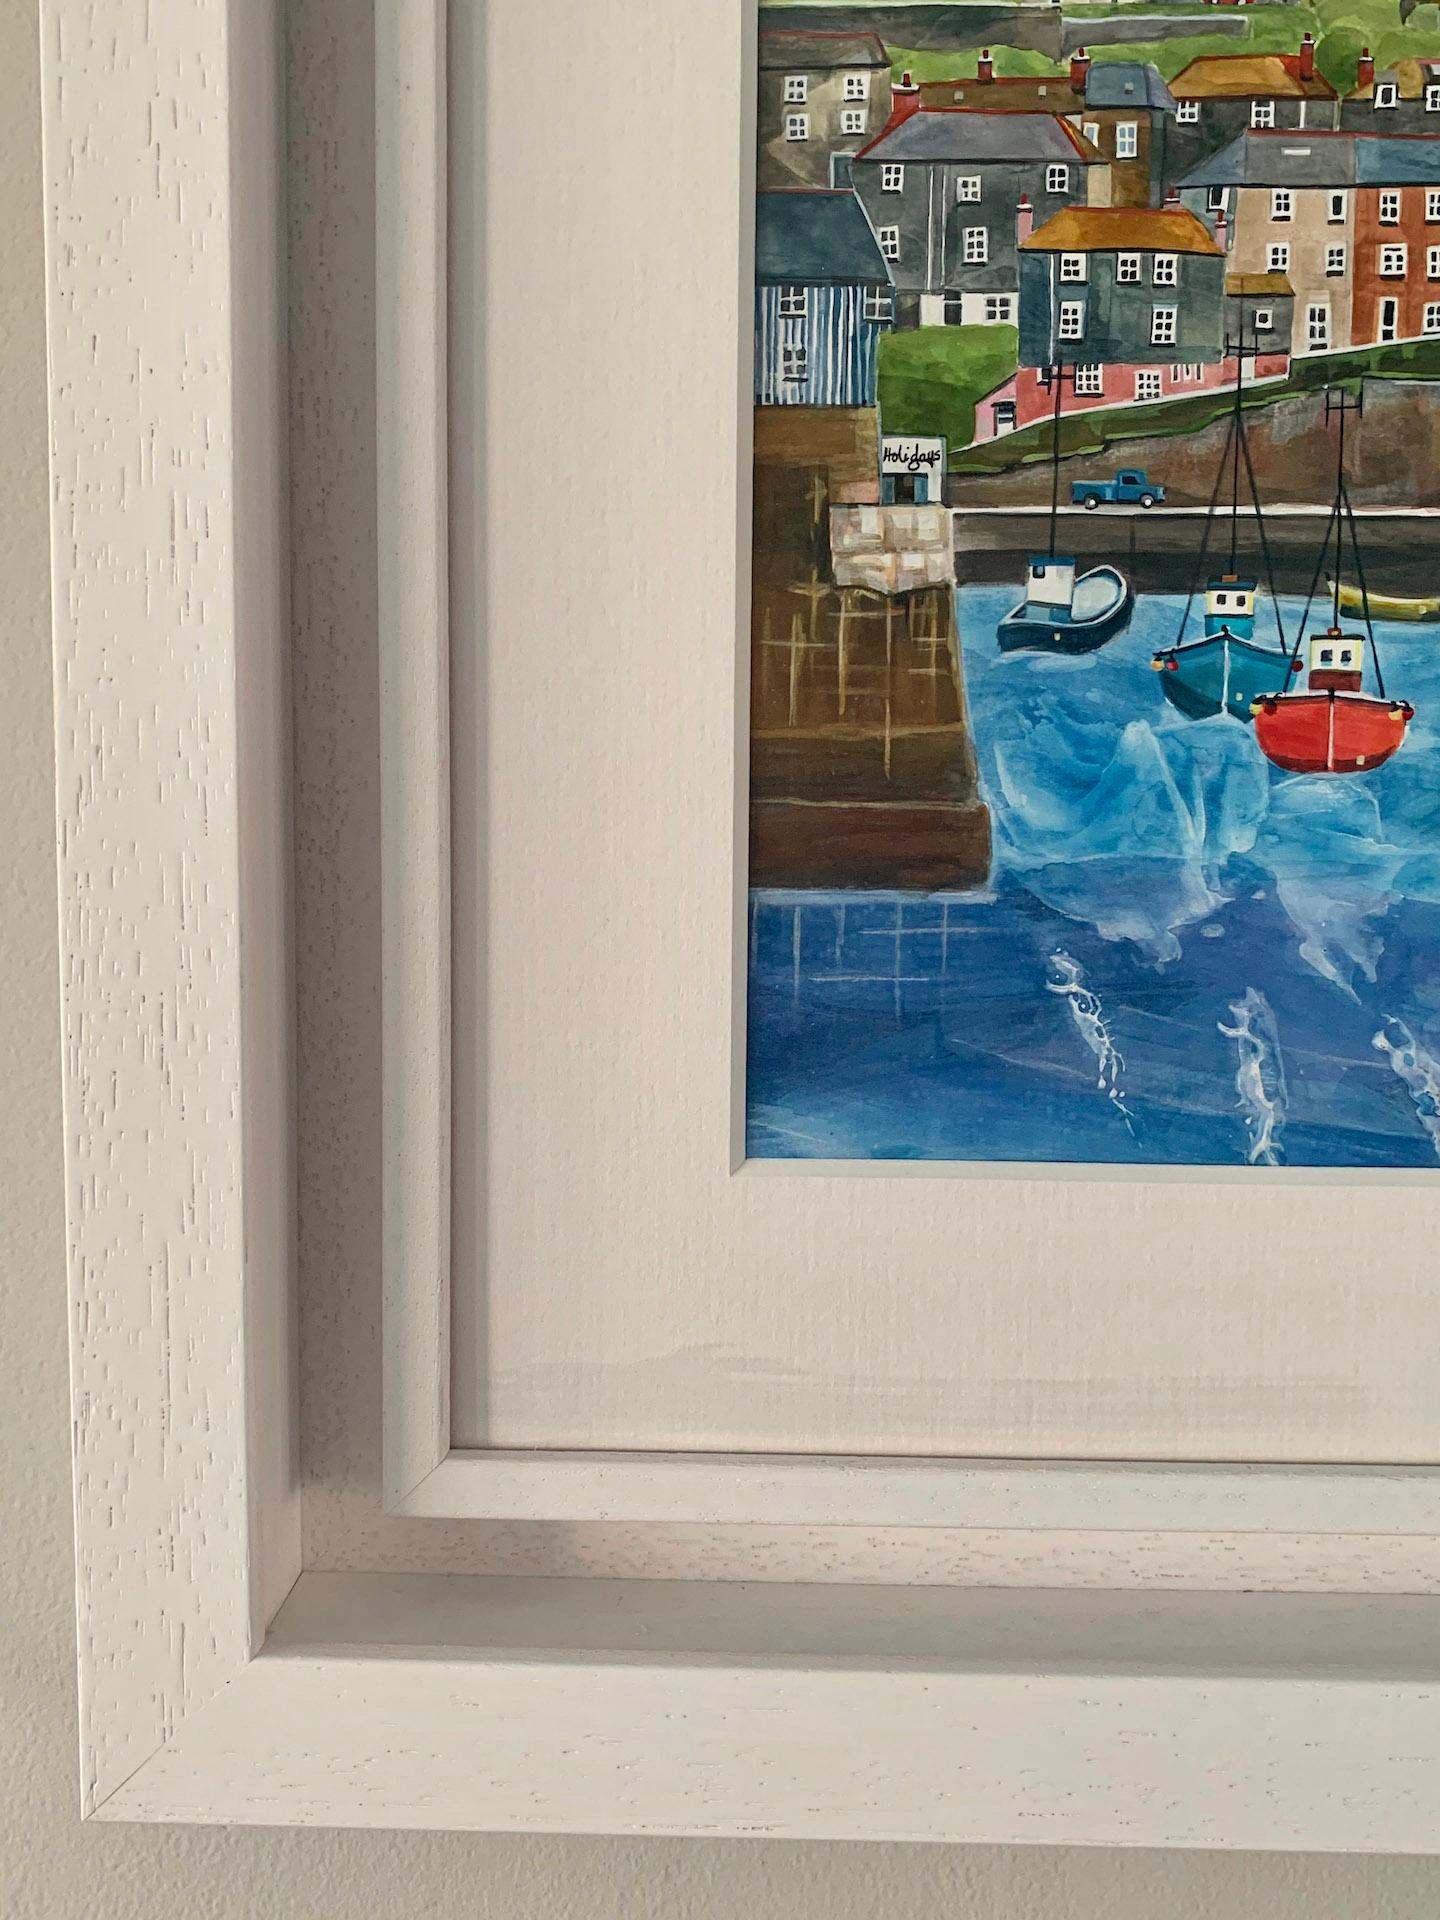 Anya Simmons
Mevagissey Harbour, Cornwall
Original seascape painting
Mixed Media on board (Gesso, acrylic and acrylic inks)
Image Size. 26cm x 26cm
Framed size. 46cm x 46cm x 4cm
Sold Framed in a Triple White Wooden Moulding with Non-Reflective Art